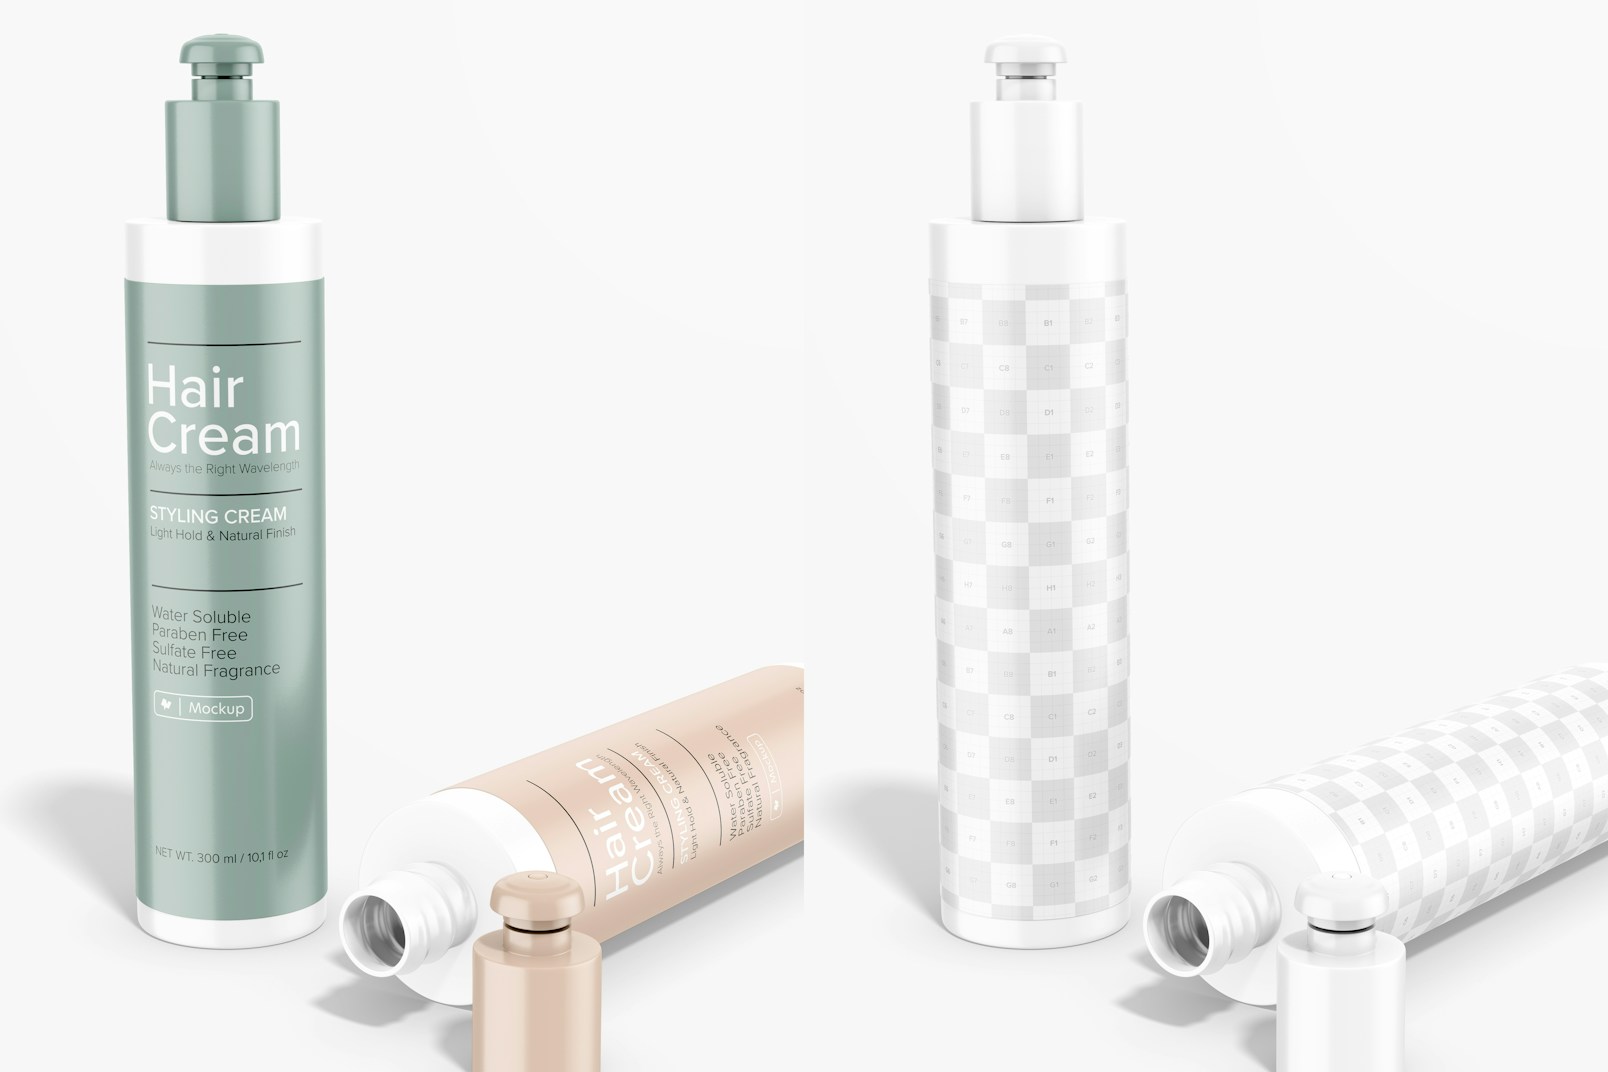 Round Hair Cream Bottle Mockup, Standing and Dropped